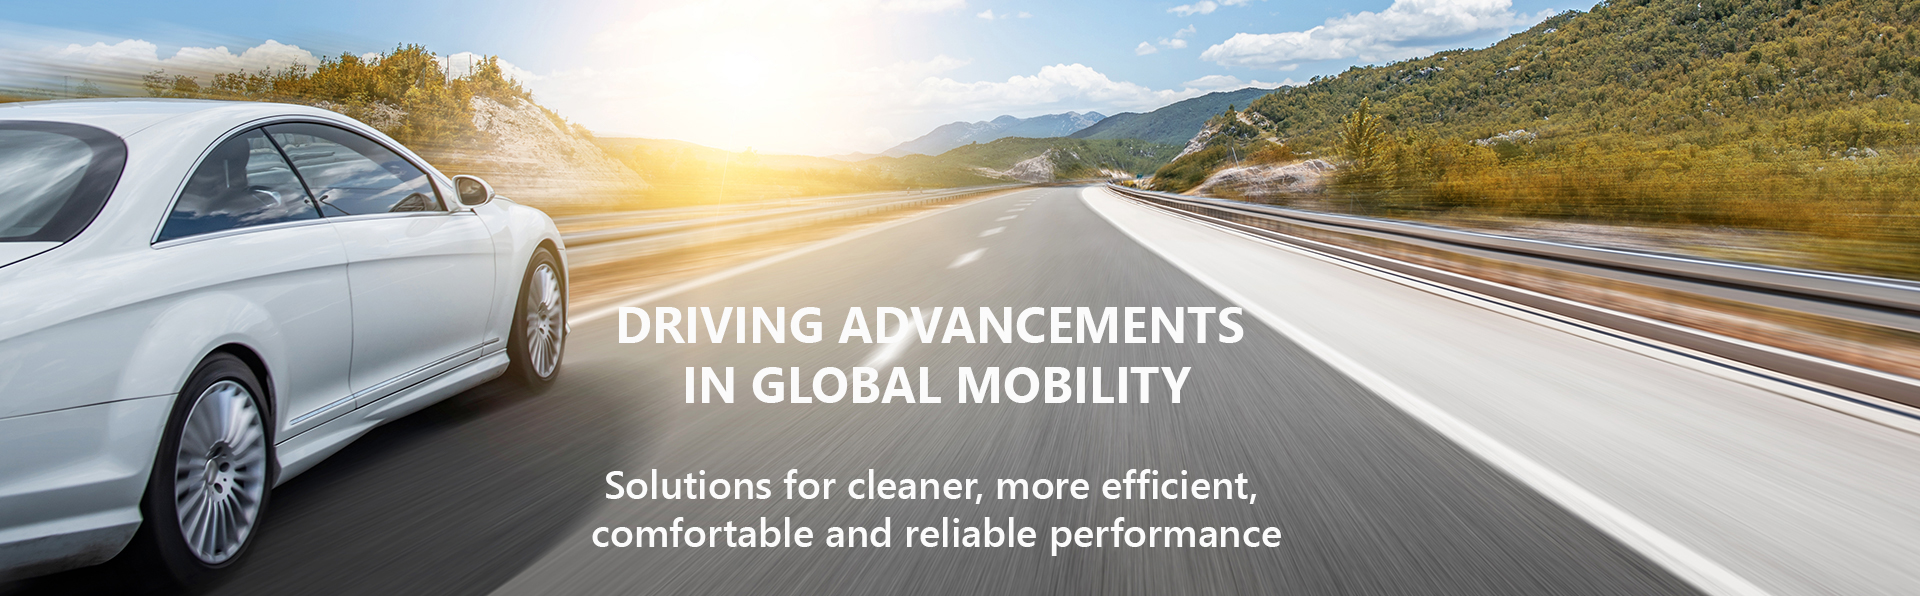 Tenneco: Driving Advancements in Global Mobility